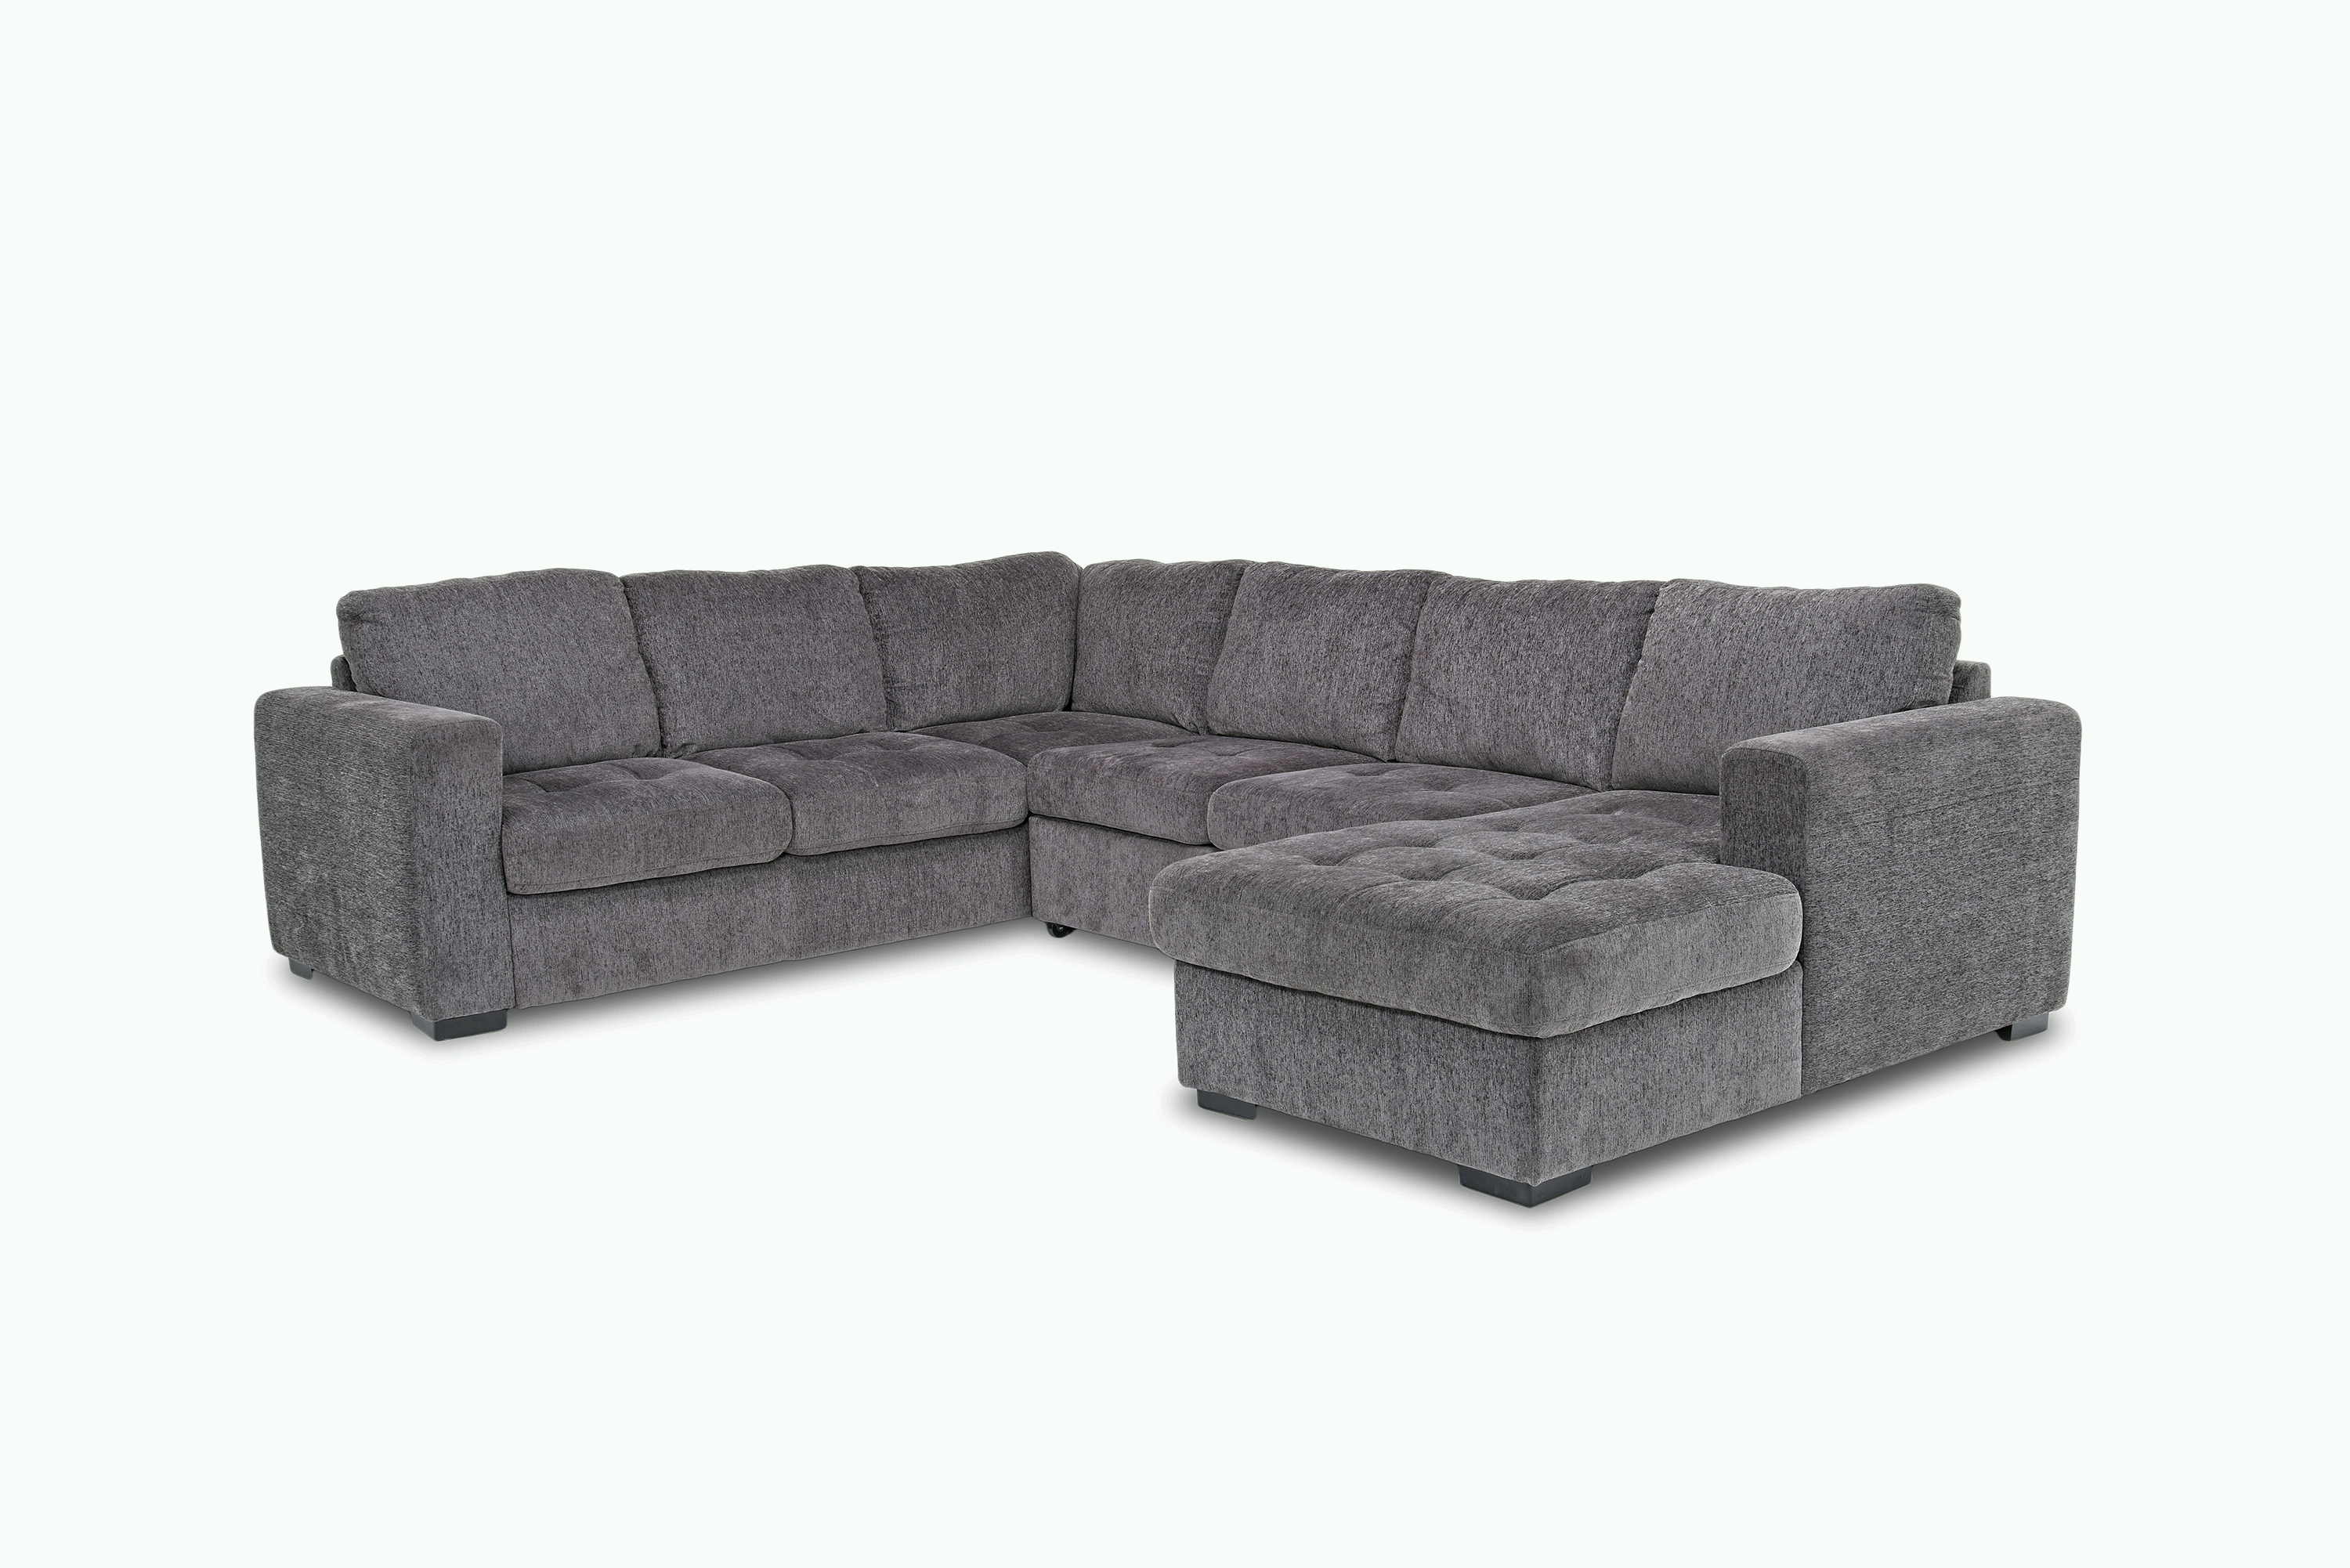 Claire Full Pullout Tux Chaise Sectional in Posh Smoke, Right Facing